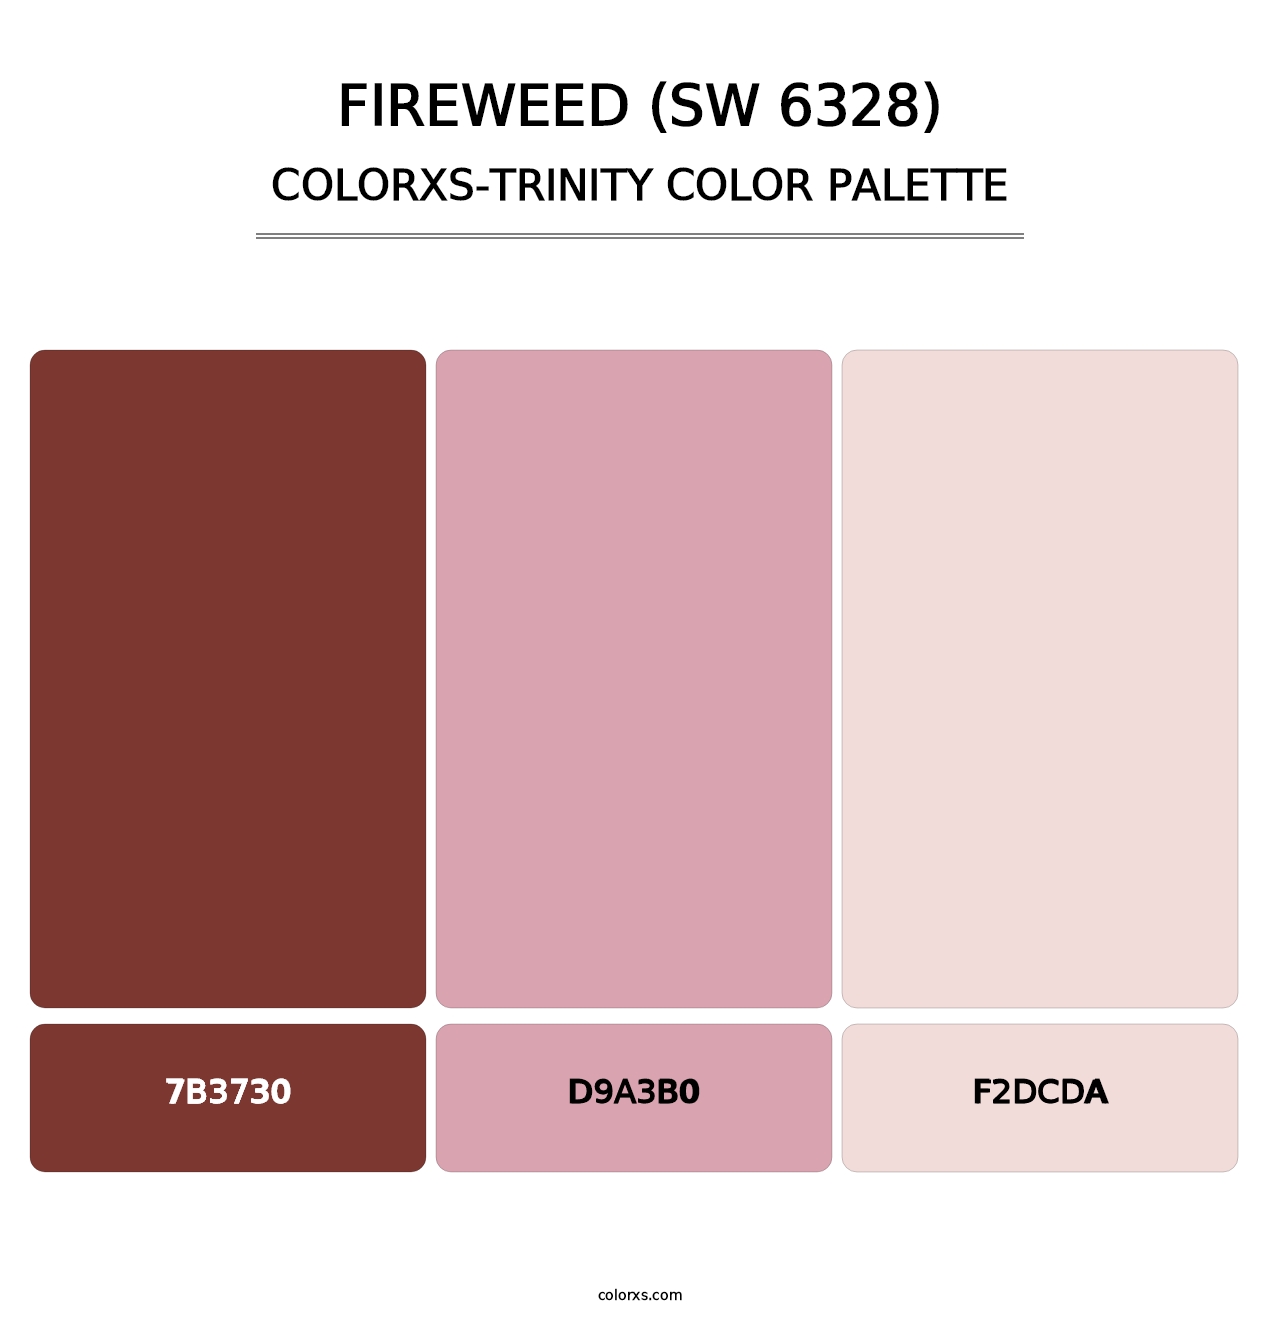 Fireweed (SW 6328) - Colorxs Trinity Palette